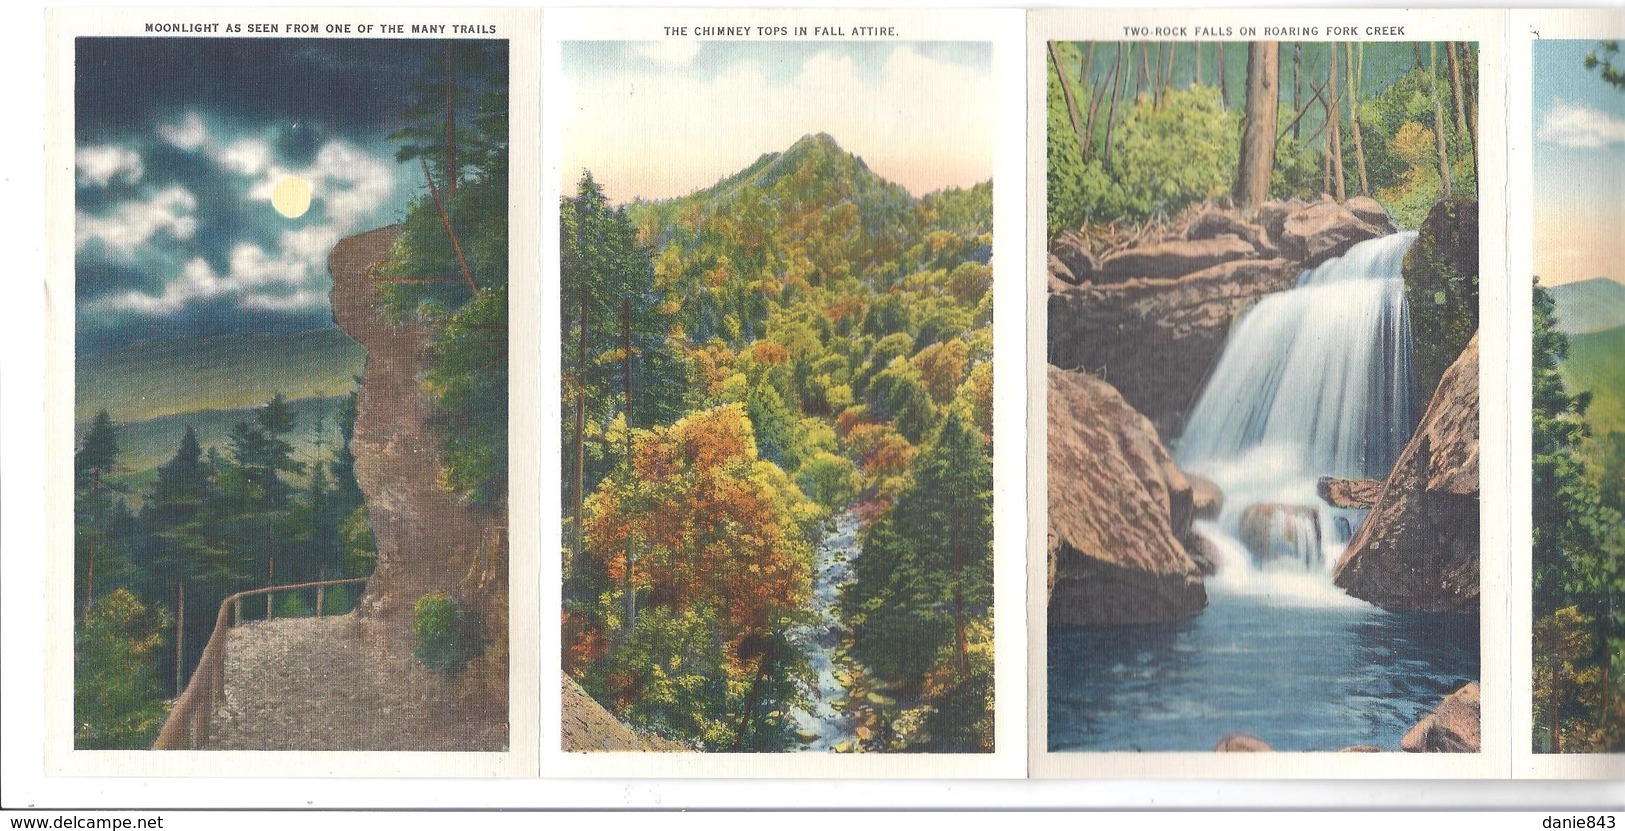 USA - Great smoky mountains national park - pochette postale, contenant 18 vues - format 9x14) -postcard cover, 18 views